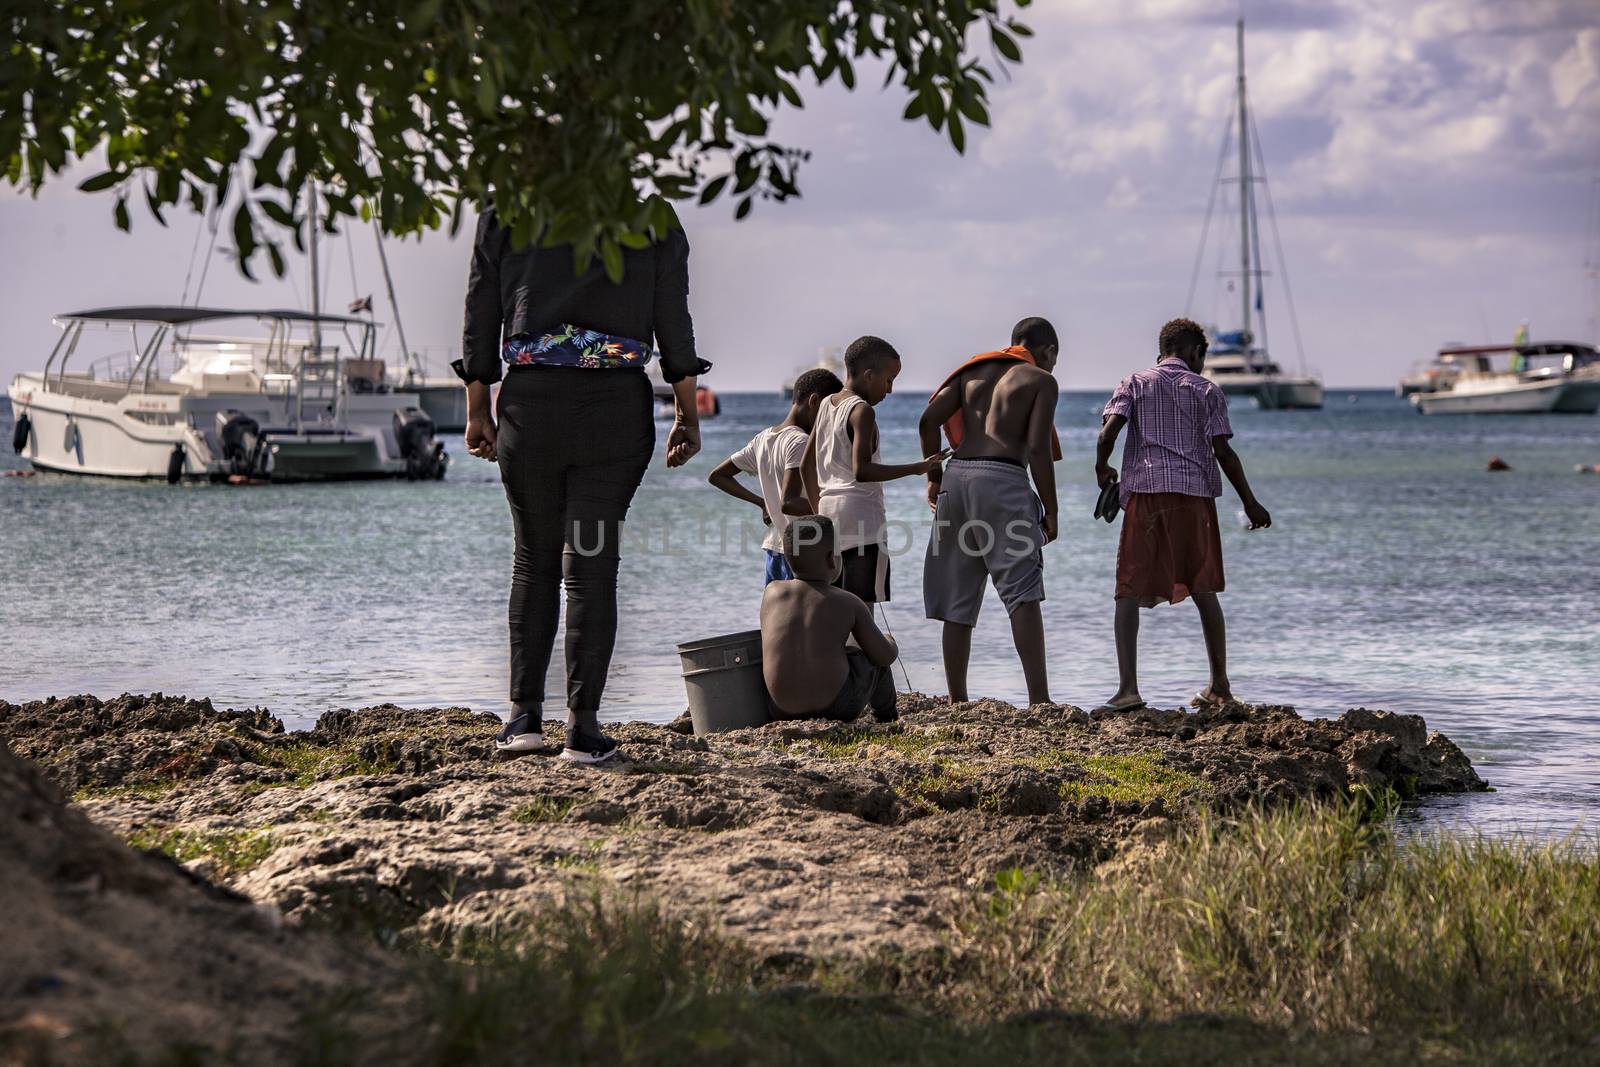 BAYAHIBE, DOMINICAN REPUBLIC 23 DECEMBER 2019: Poor Dominican children play in Bayahibe beach in total happiness and joy